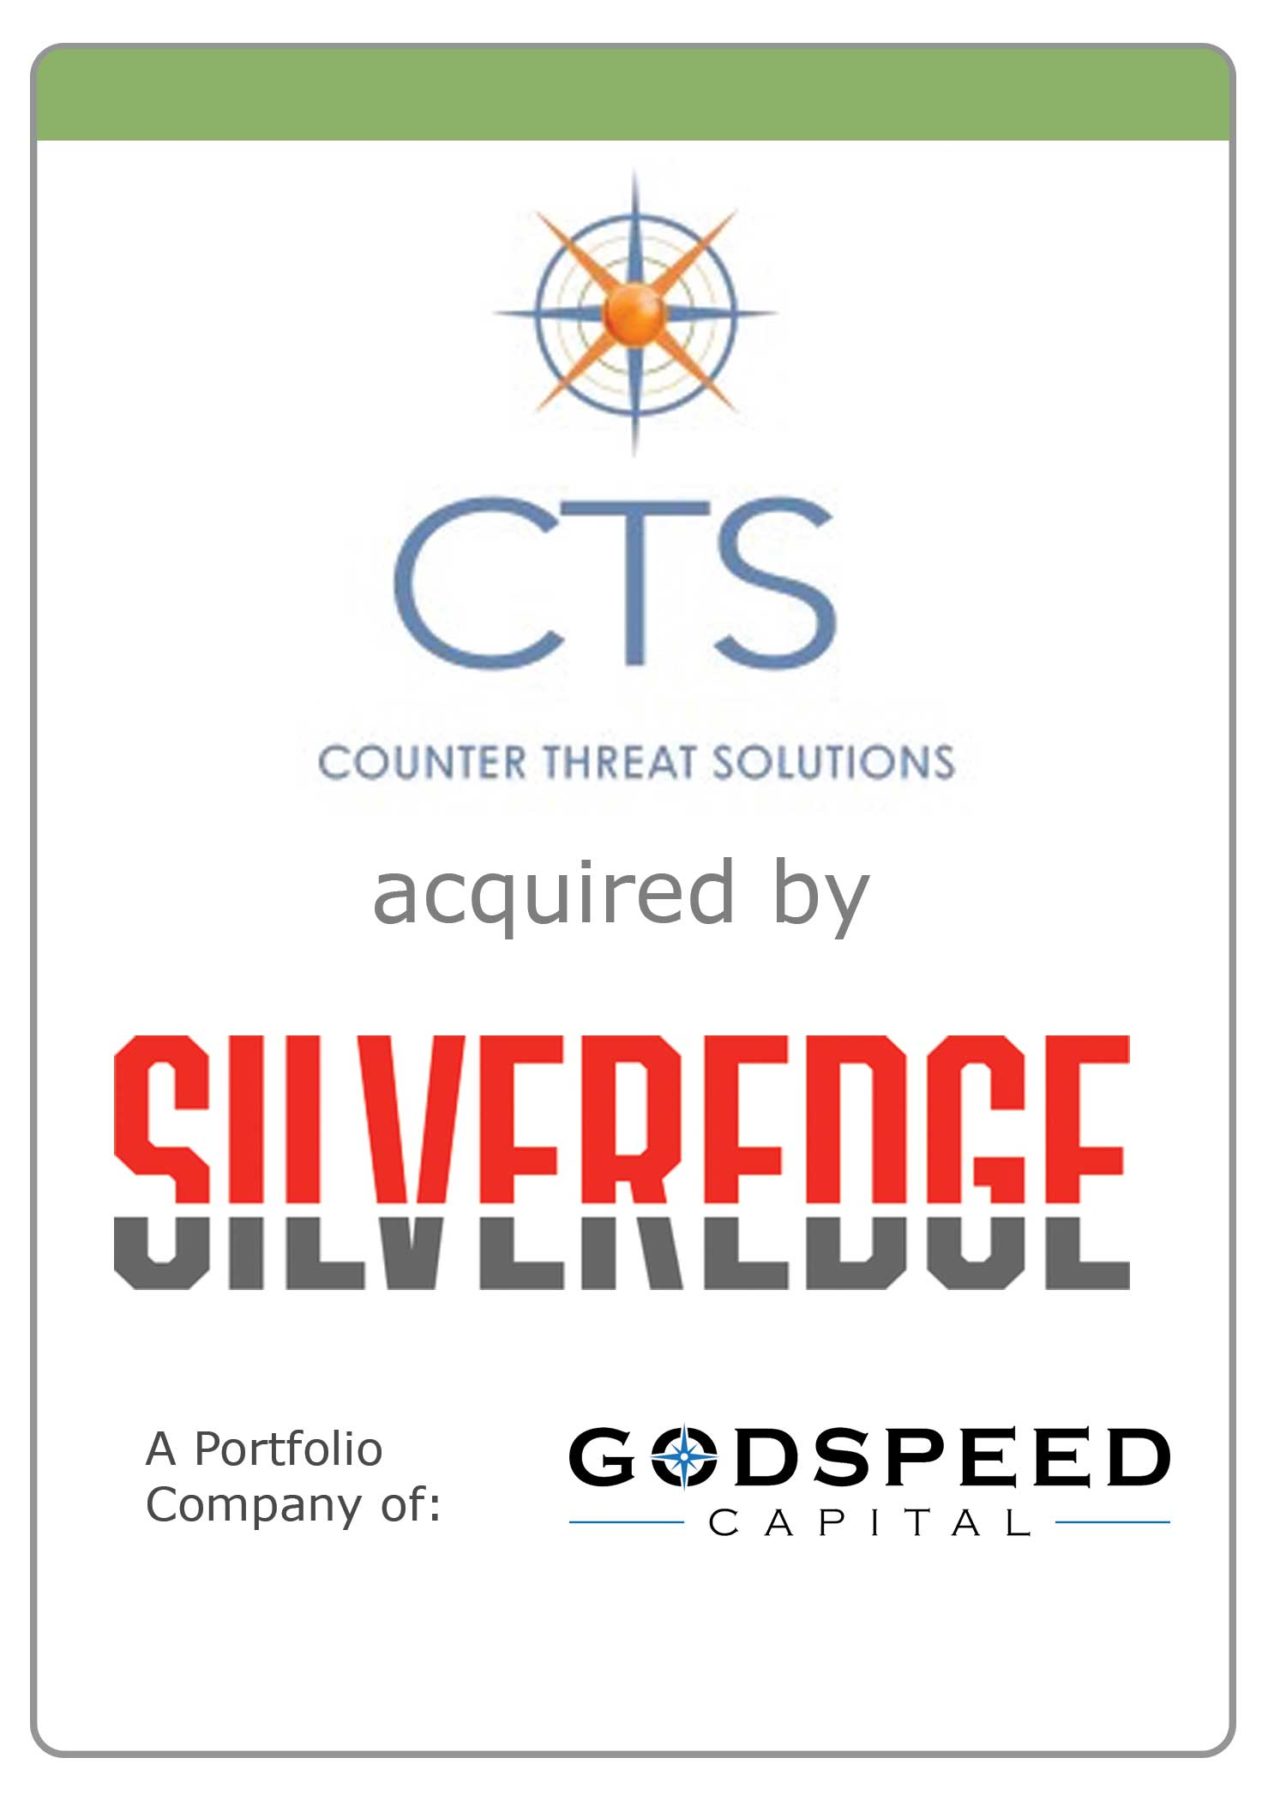 CTS acquired by SilverEdge a Godspeed Capital company